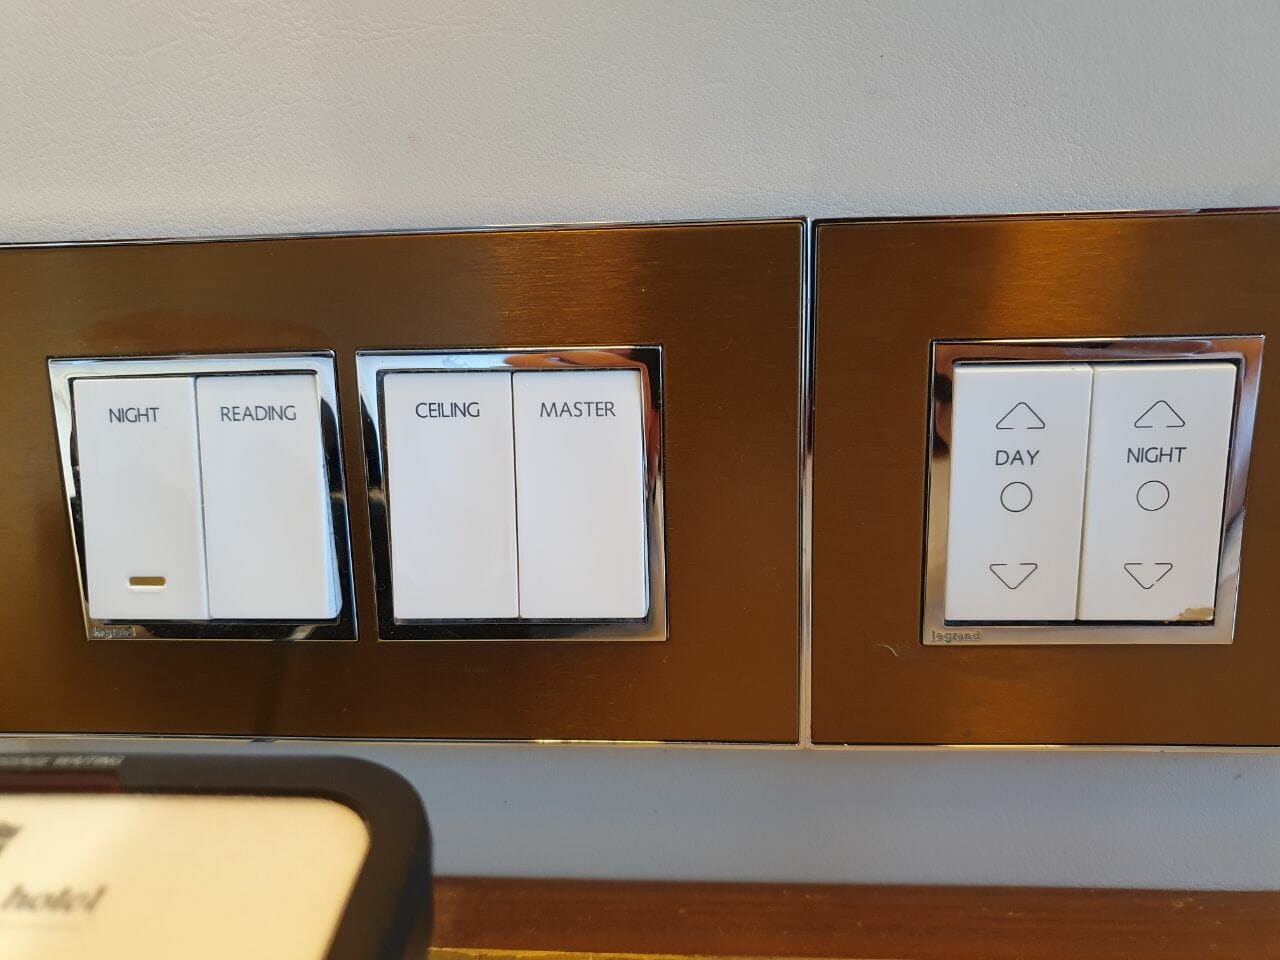 Bedside switches